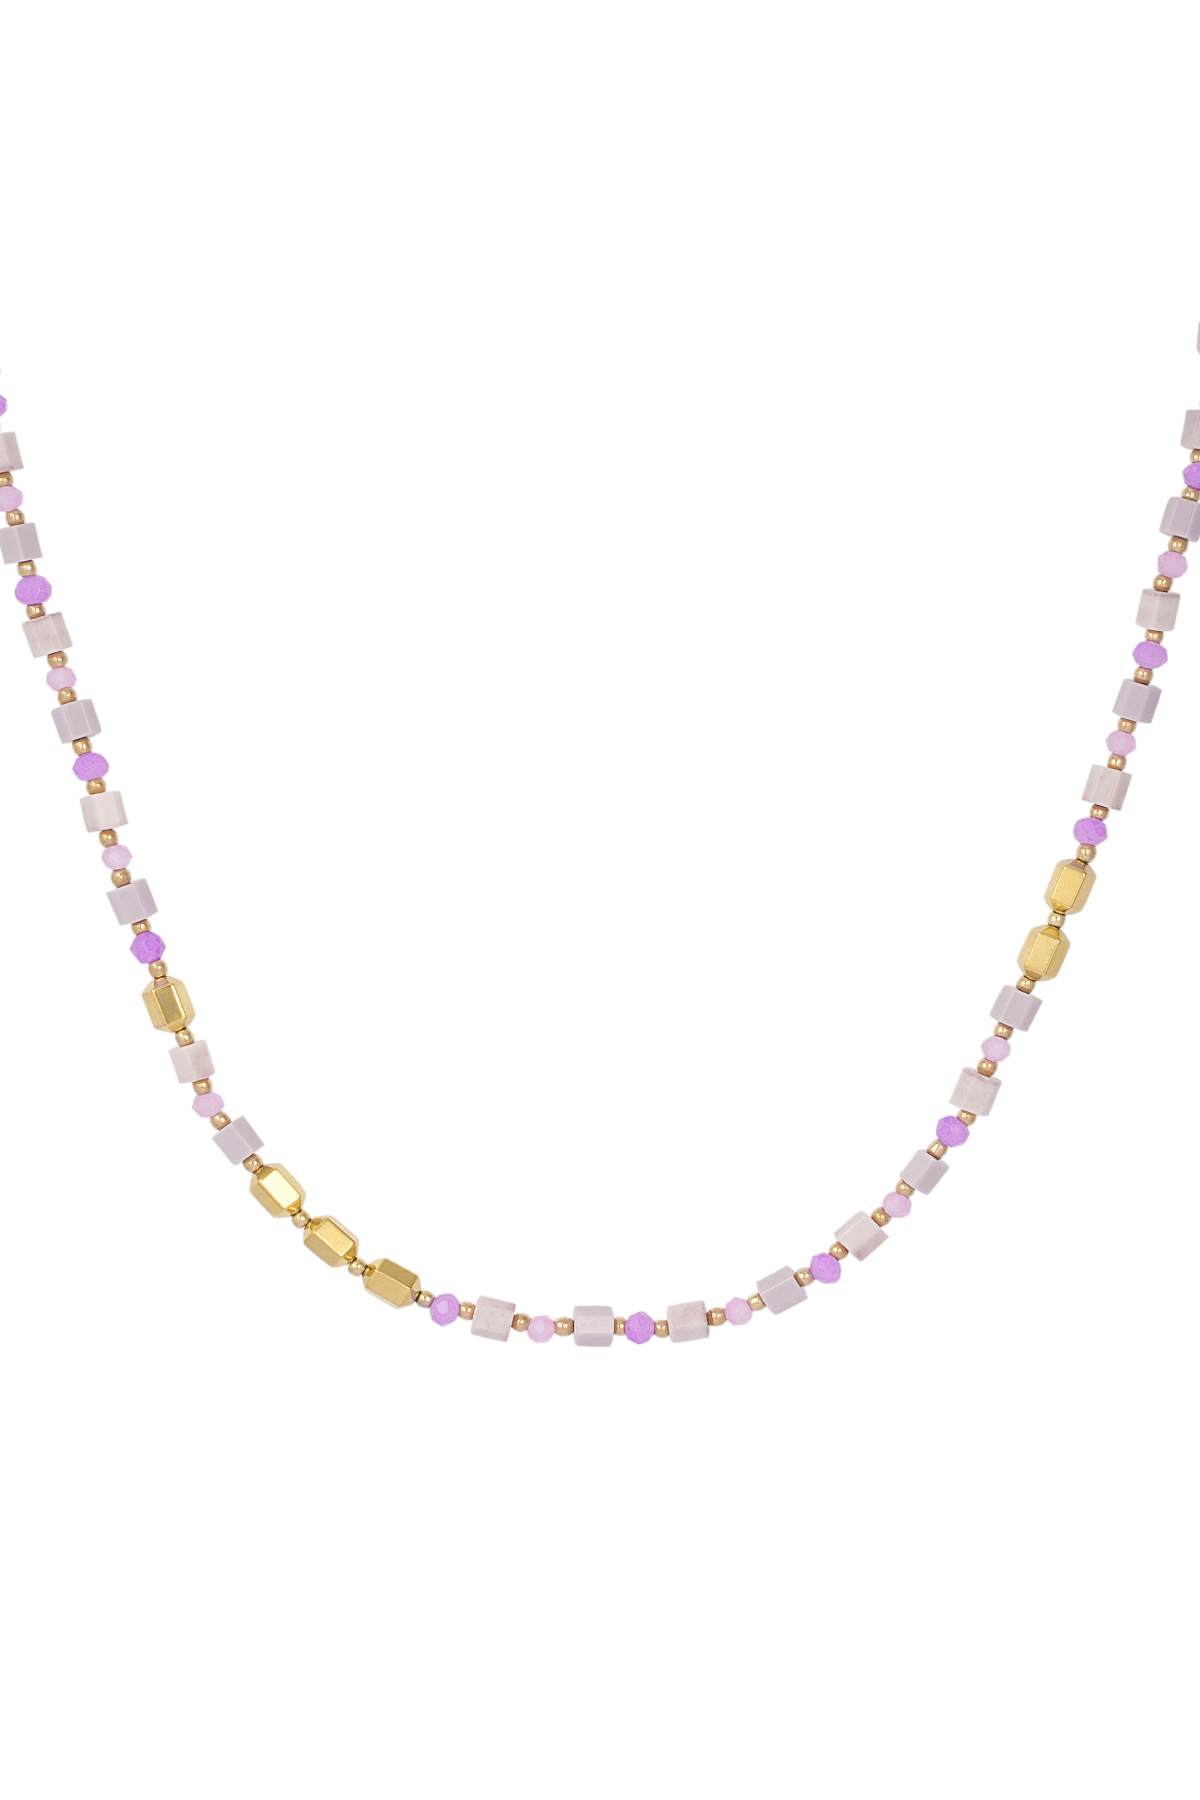 Necklace summer mist - lilac